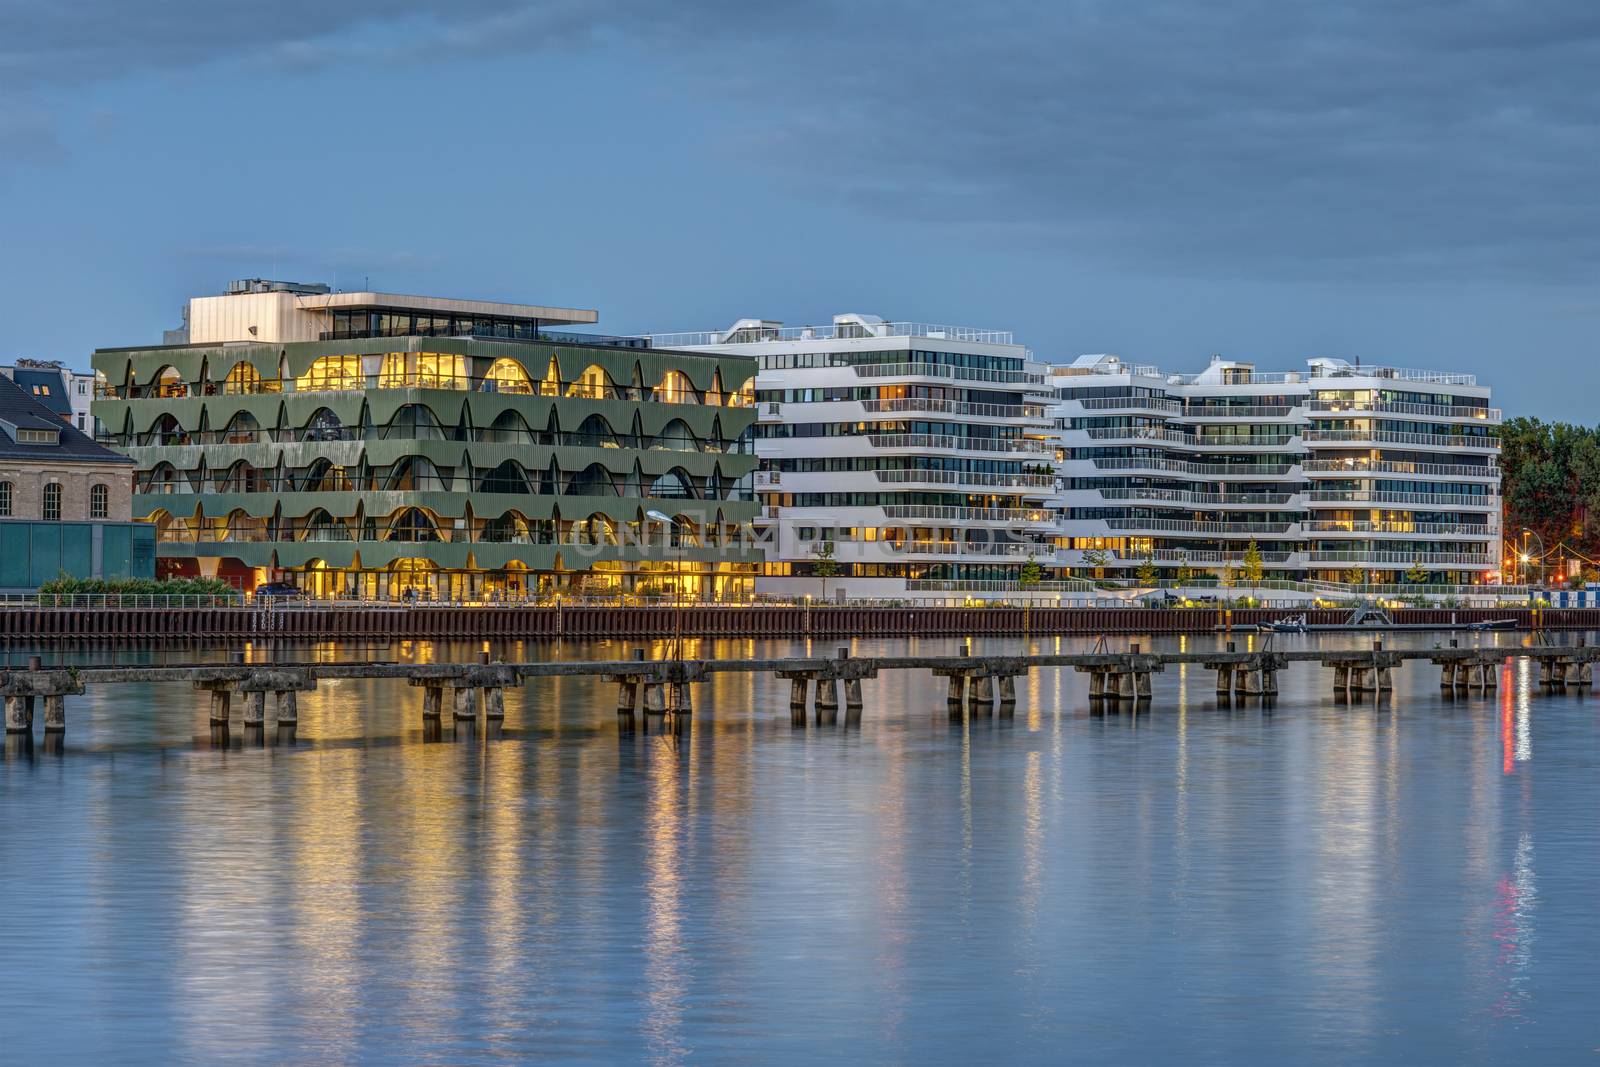 New apartment buildings at the river Spree in Berlin at dusk